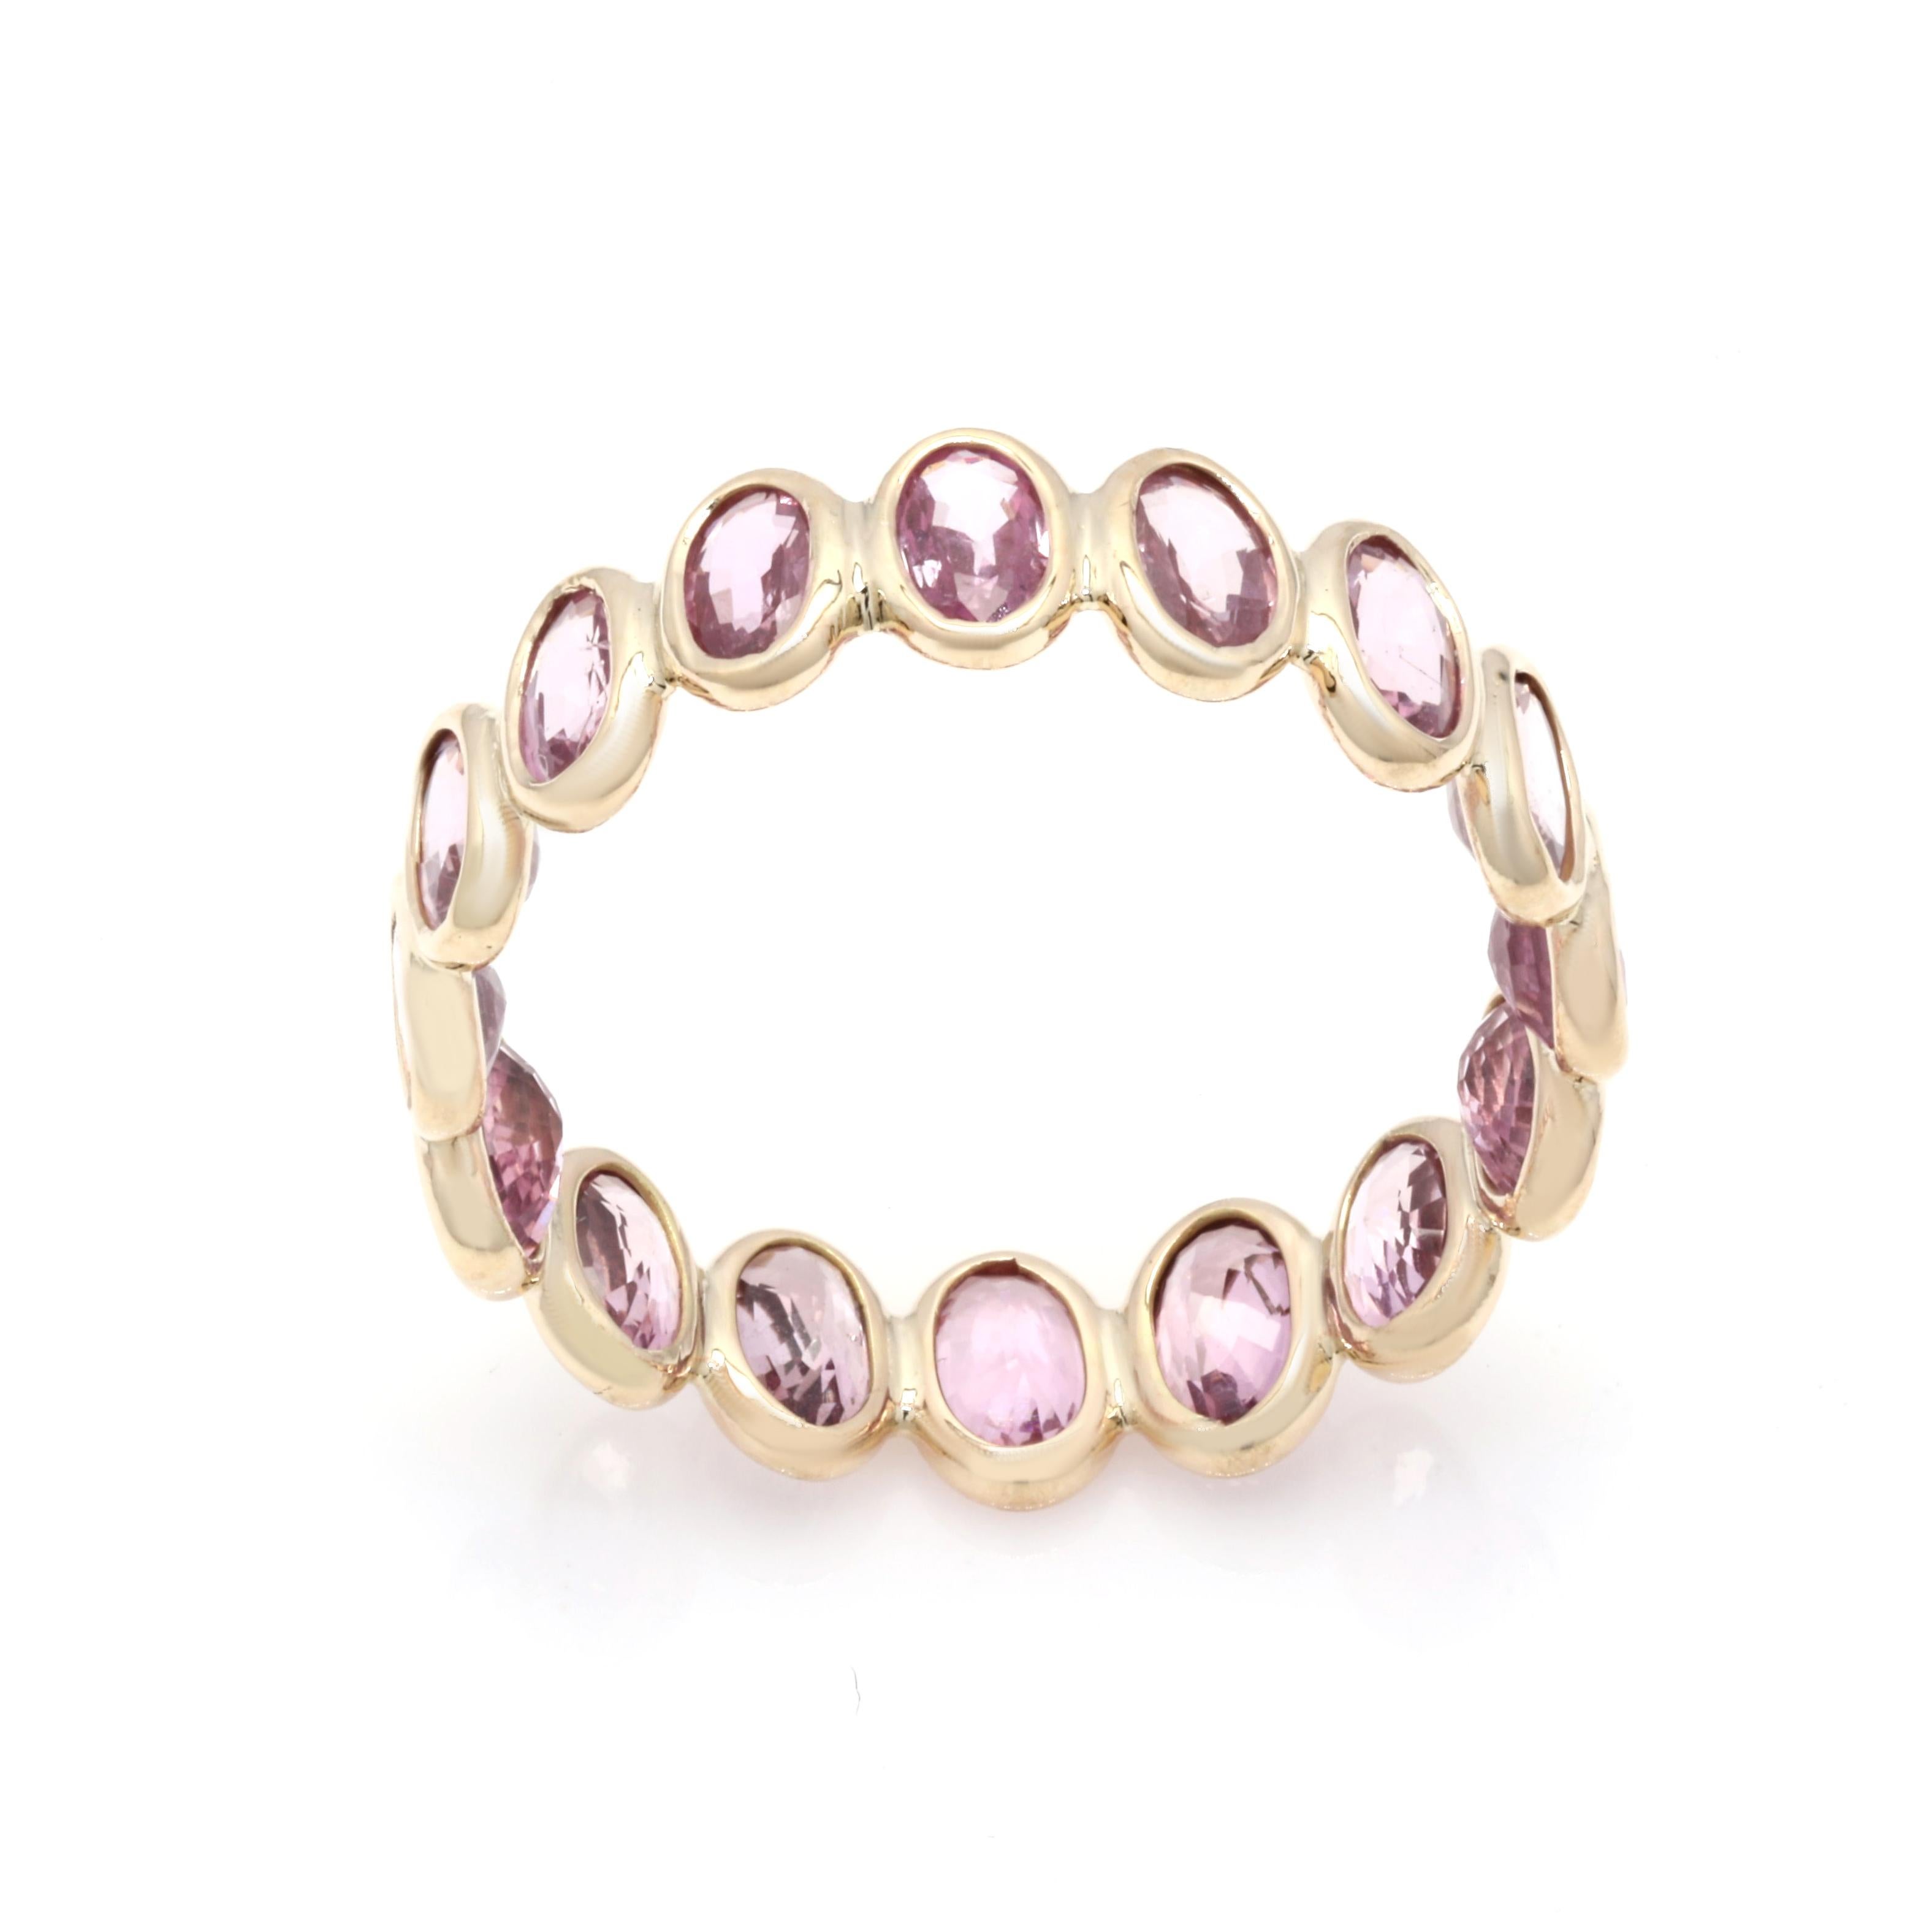 For Sale:  Handmade 4.47 Ct Oval Pink Sapphire Birthstone Eternity Ring in 14K Yellow Gold 3